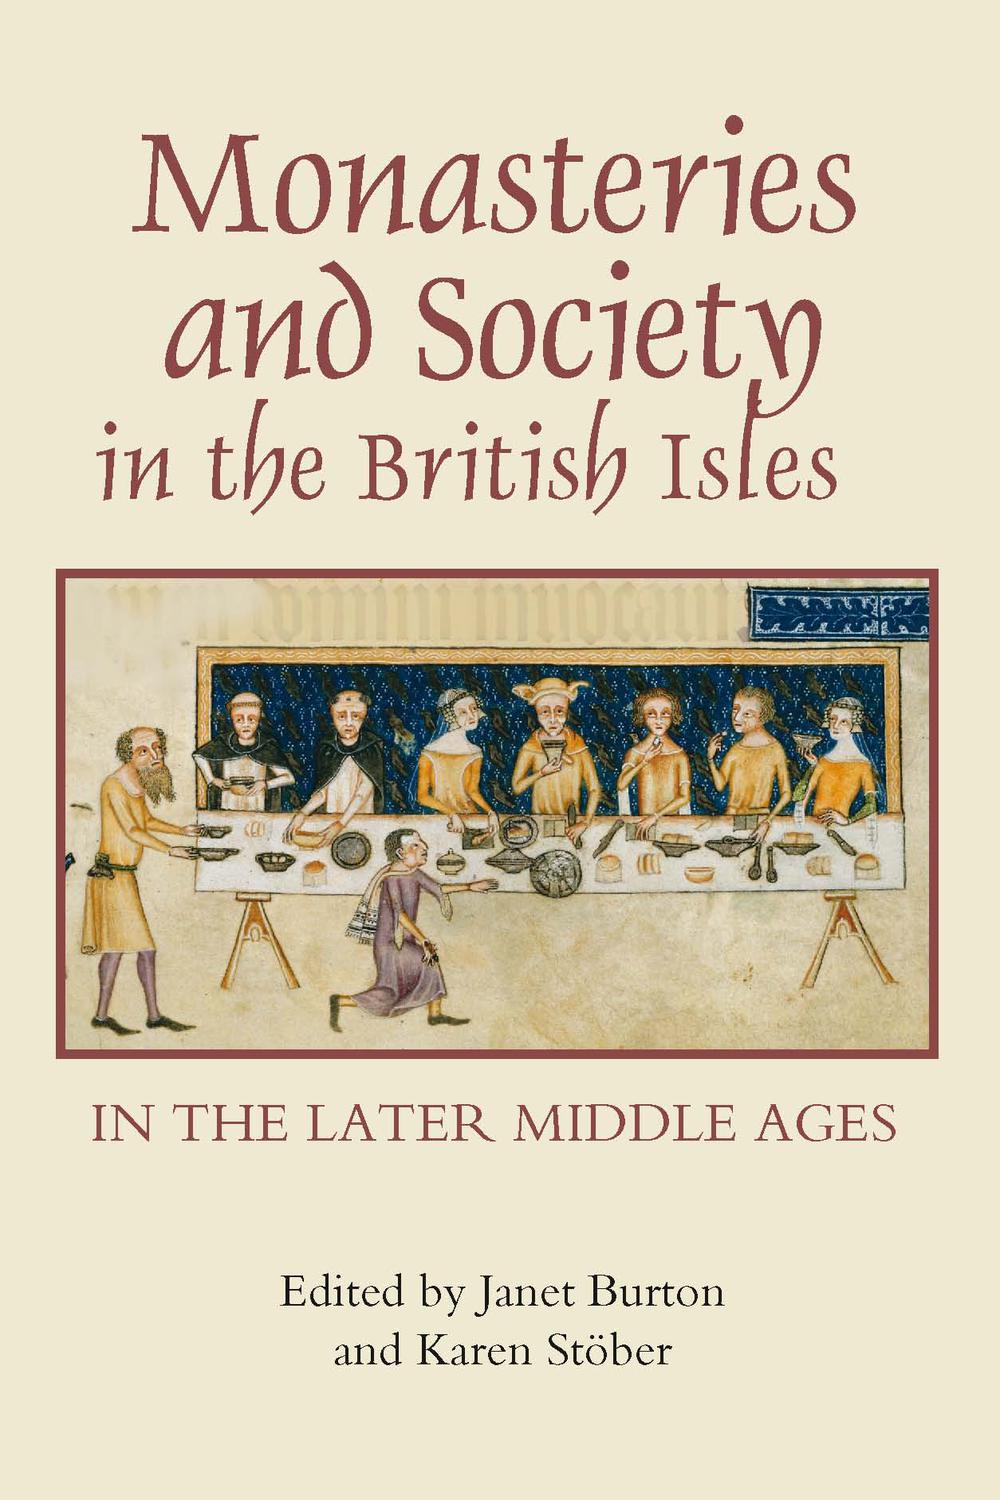 Monasteries and Society in the British Isles in the Later Middle Ages - Janet Burton, Karen Stöber